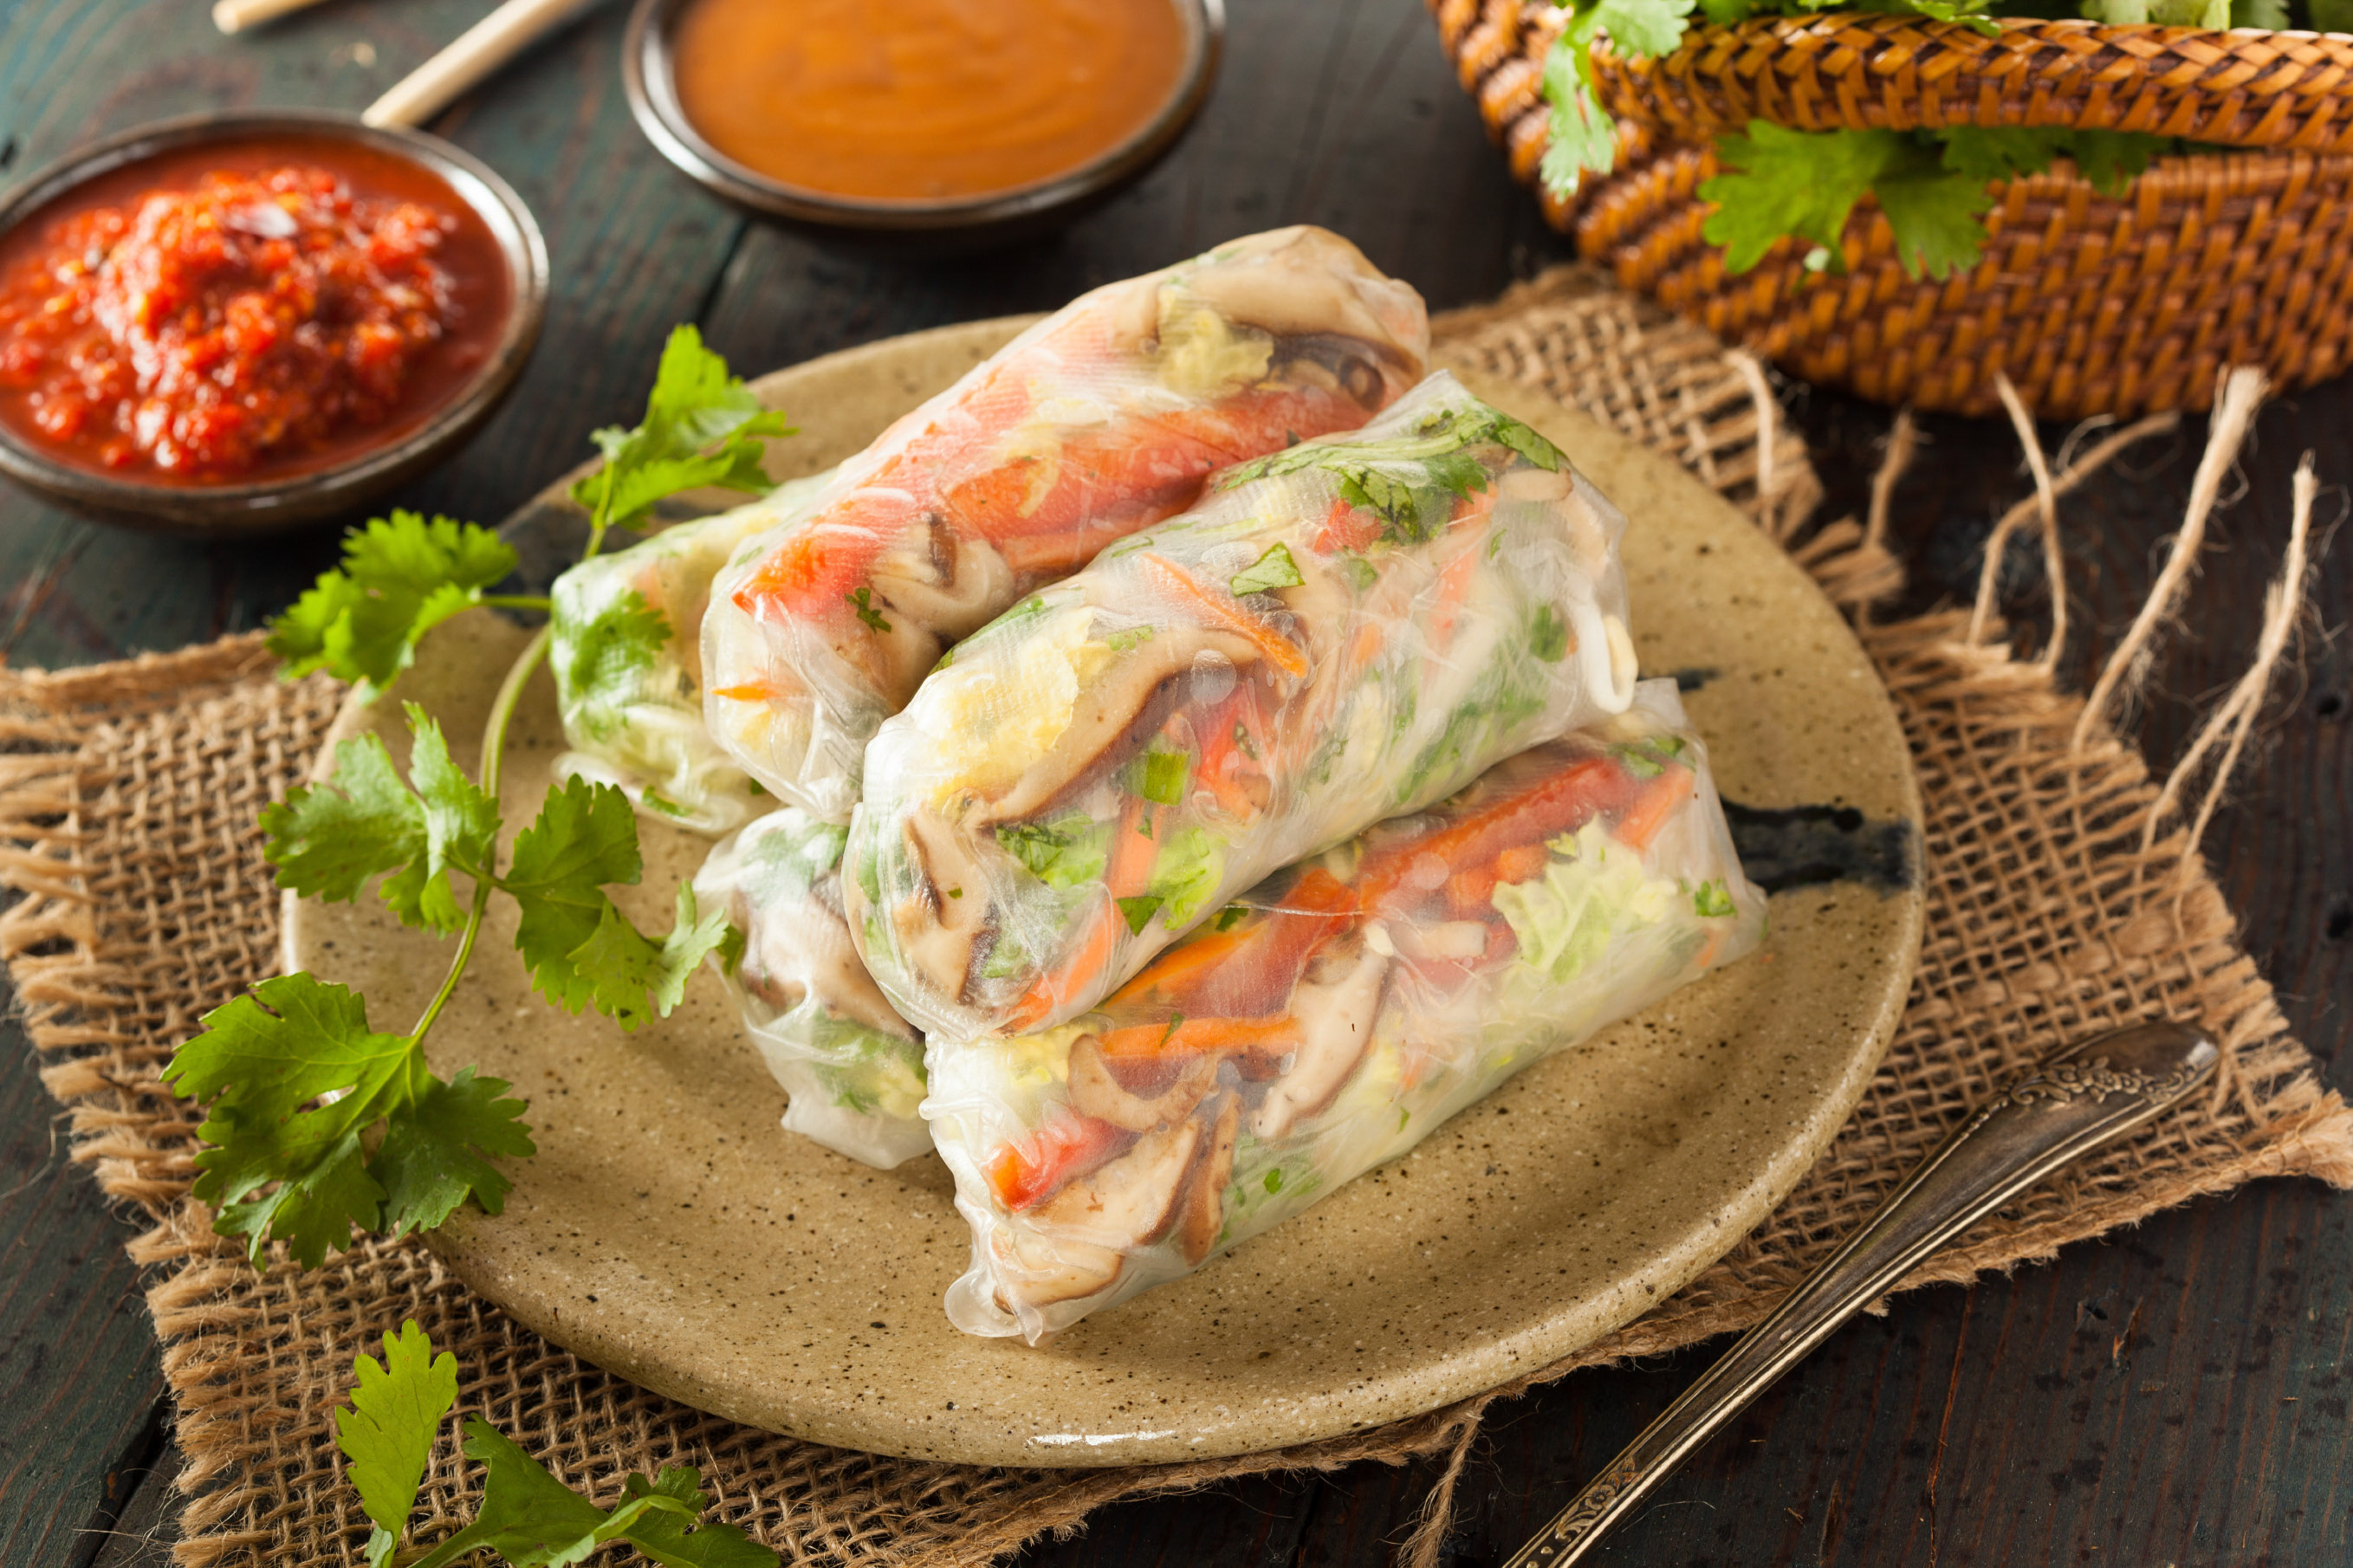 Healthy ideas for lunch: vegetarian spring rolls with cilantro carrots and cabbage